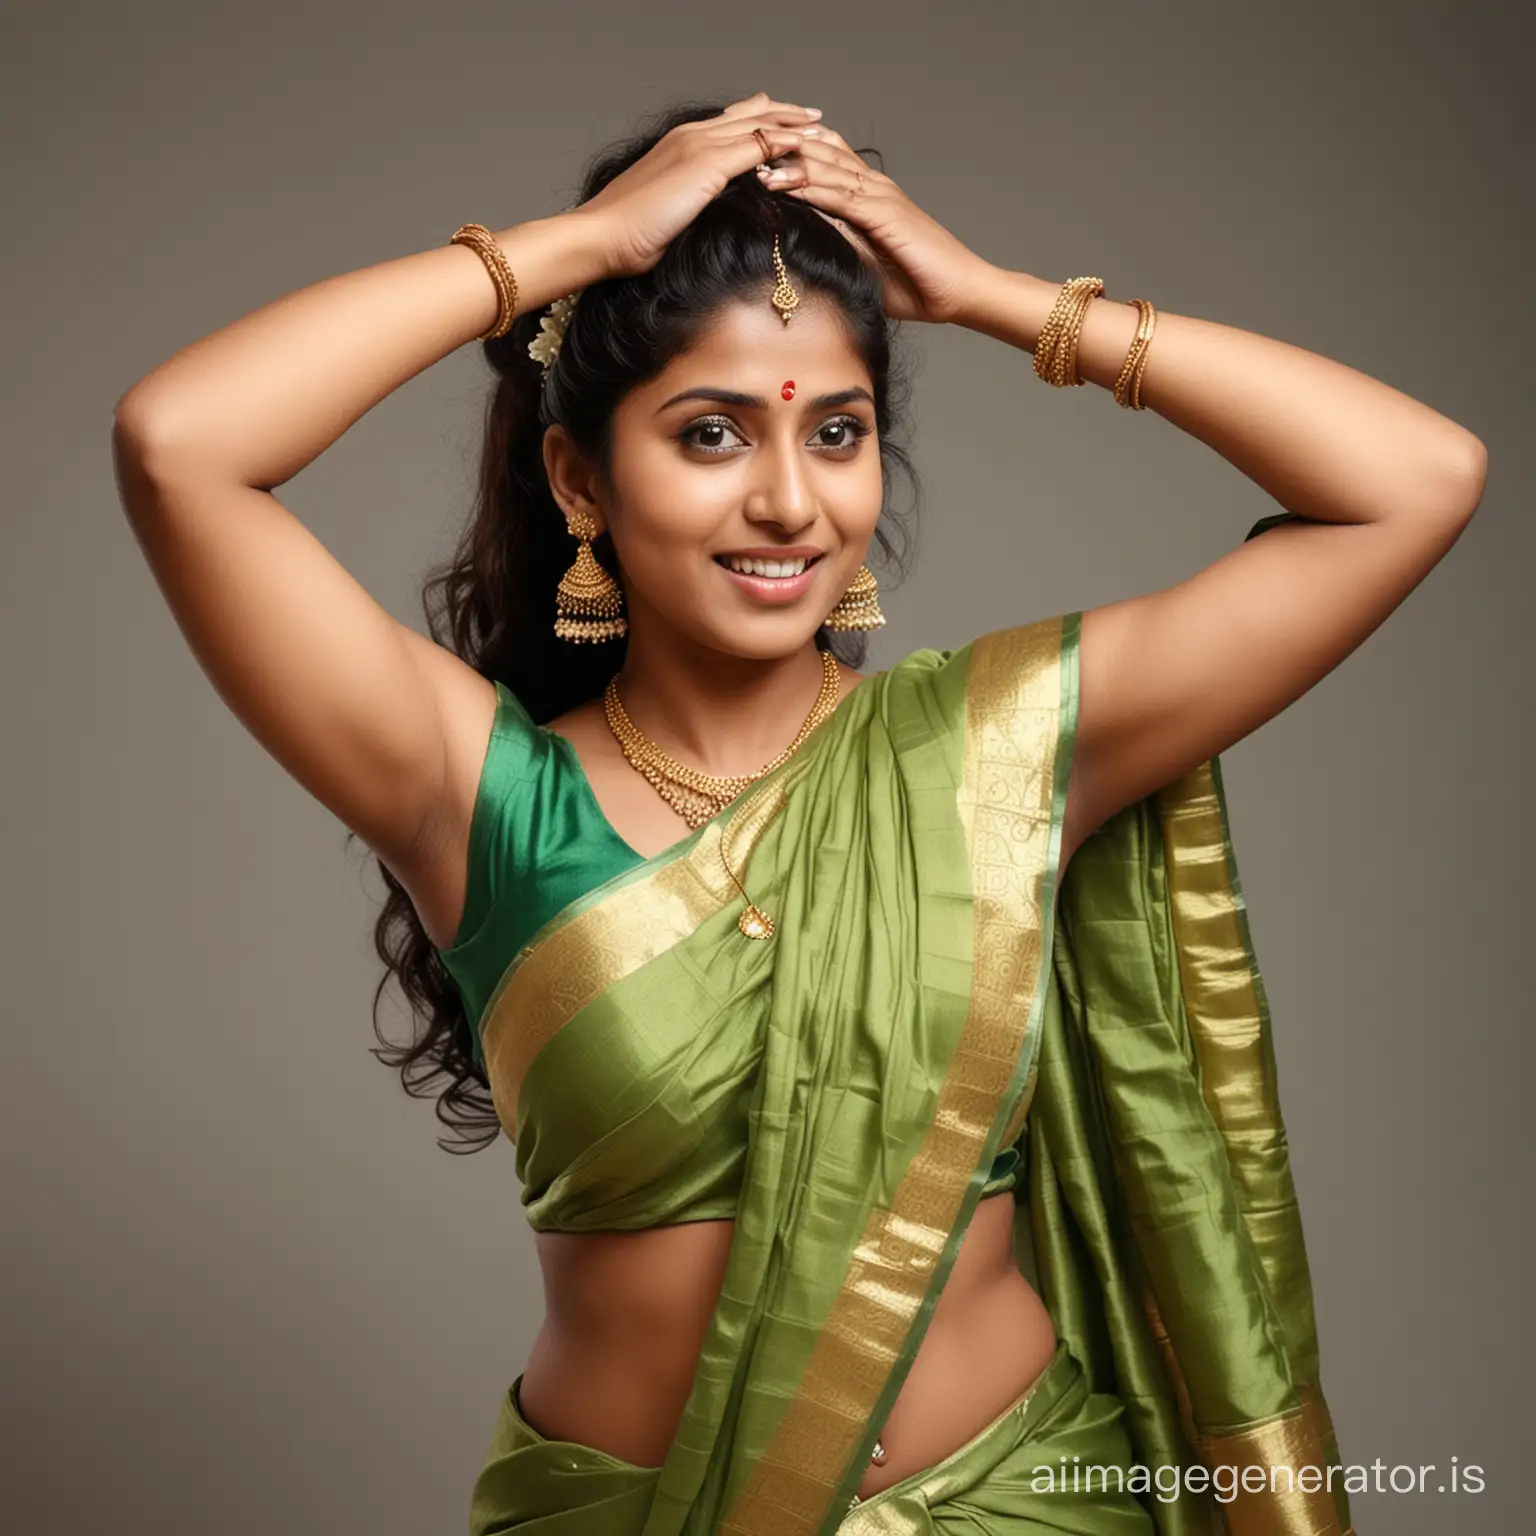 South Indian married women in age 30's in sleeveless blowse and Kerala saree with full hands raised and holding the back of head and tender unshaved hair in armpits, make it look traditional.